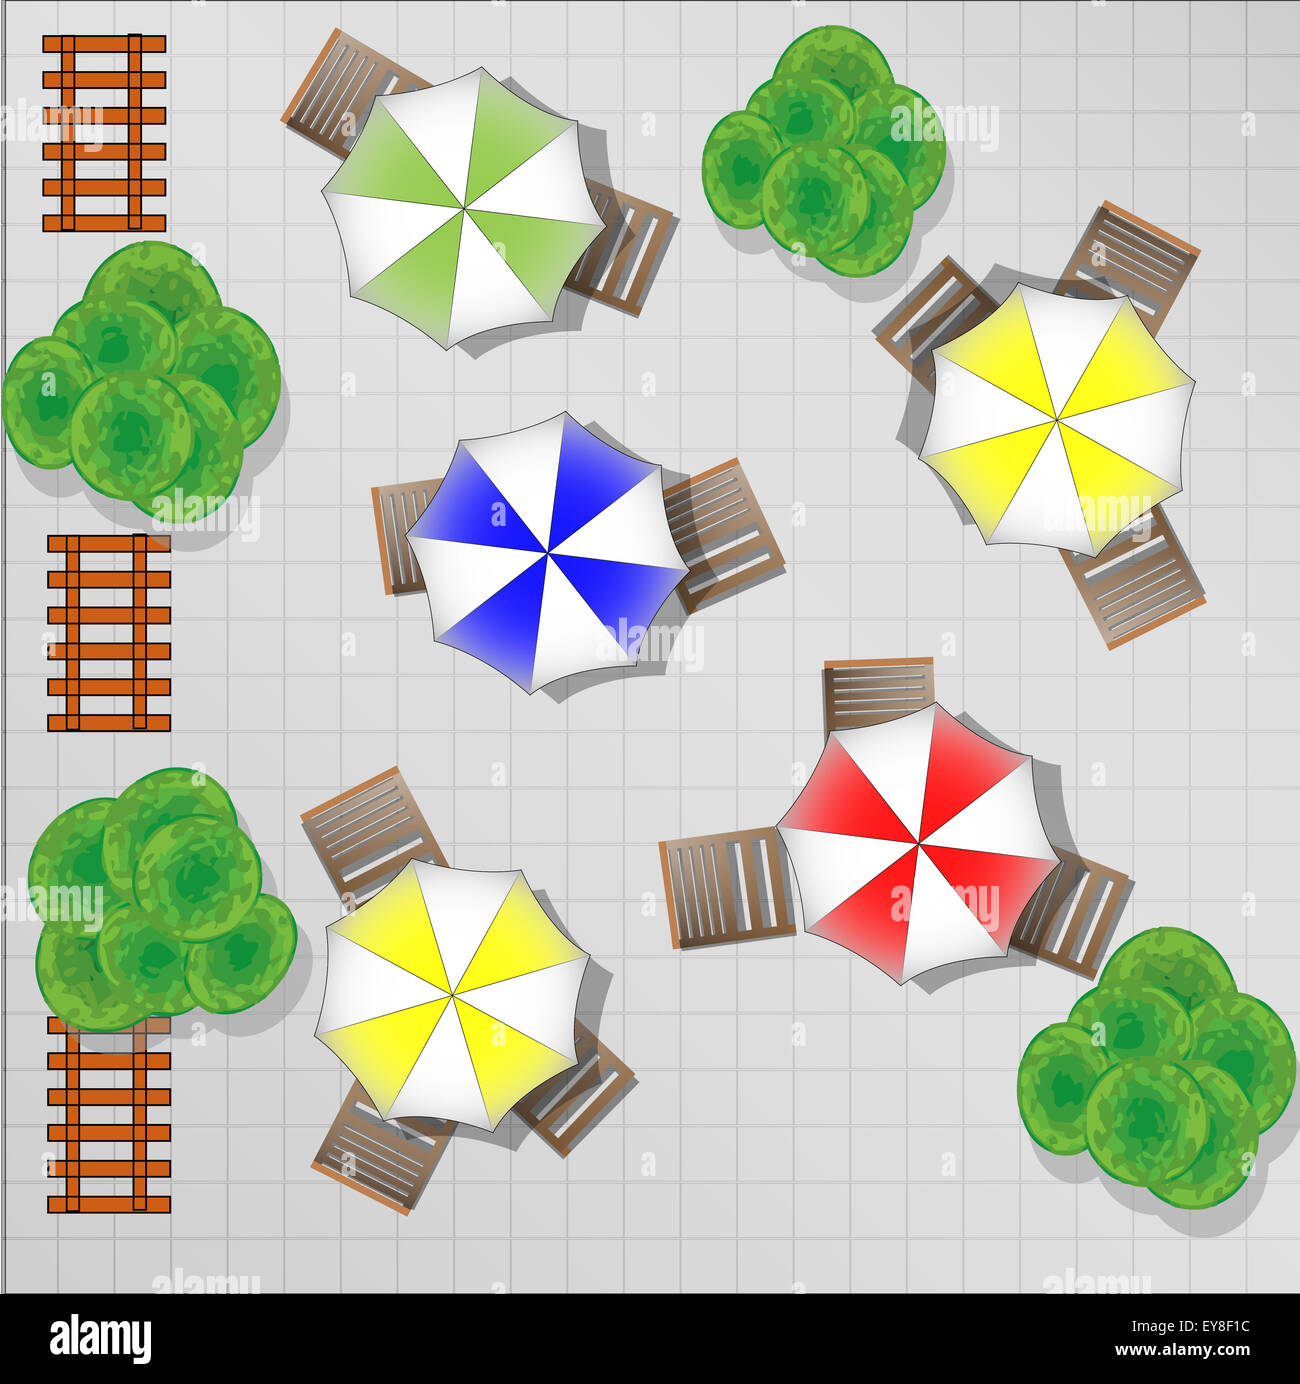 Illustration of square with chairs and parasols from above Stock Photo